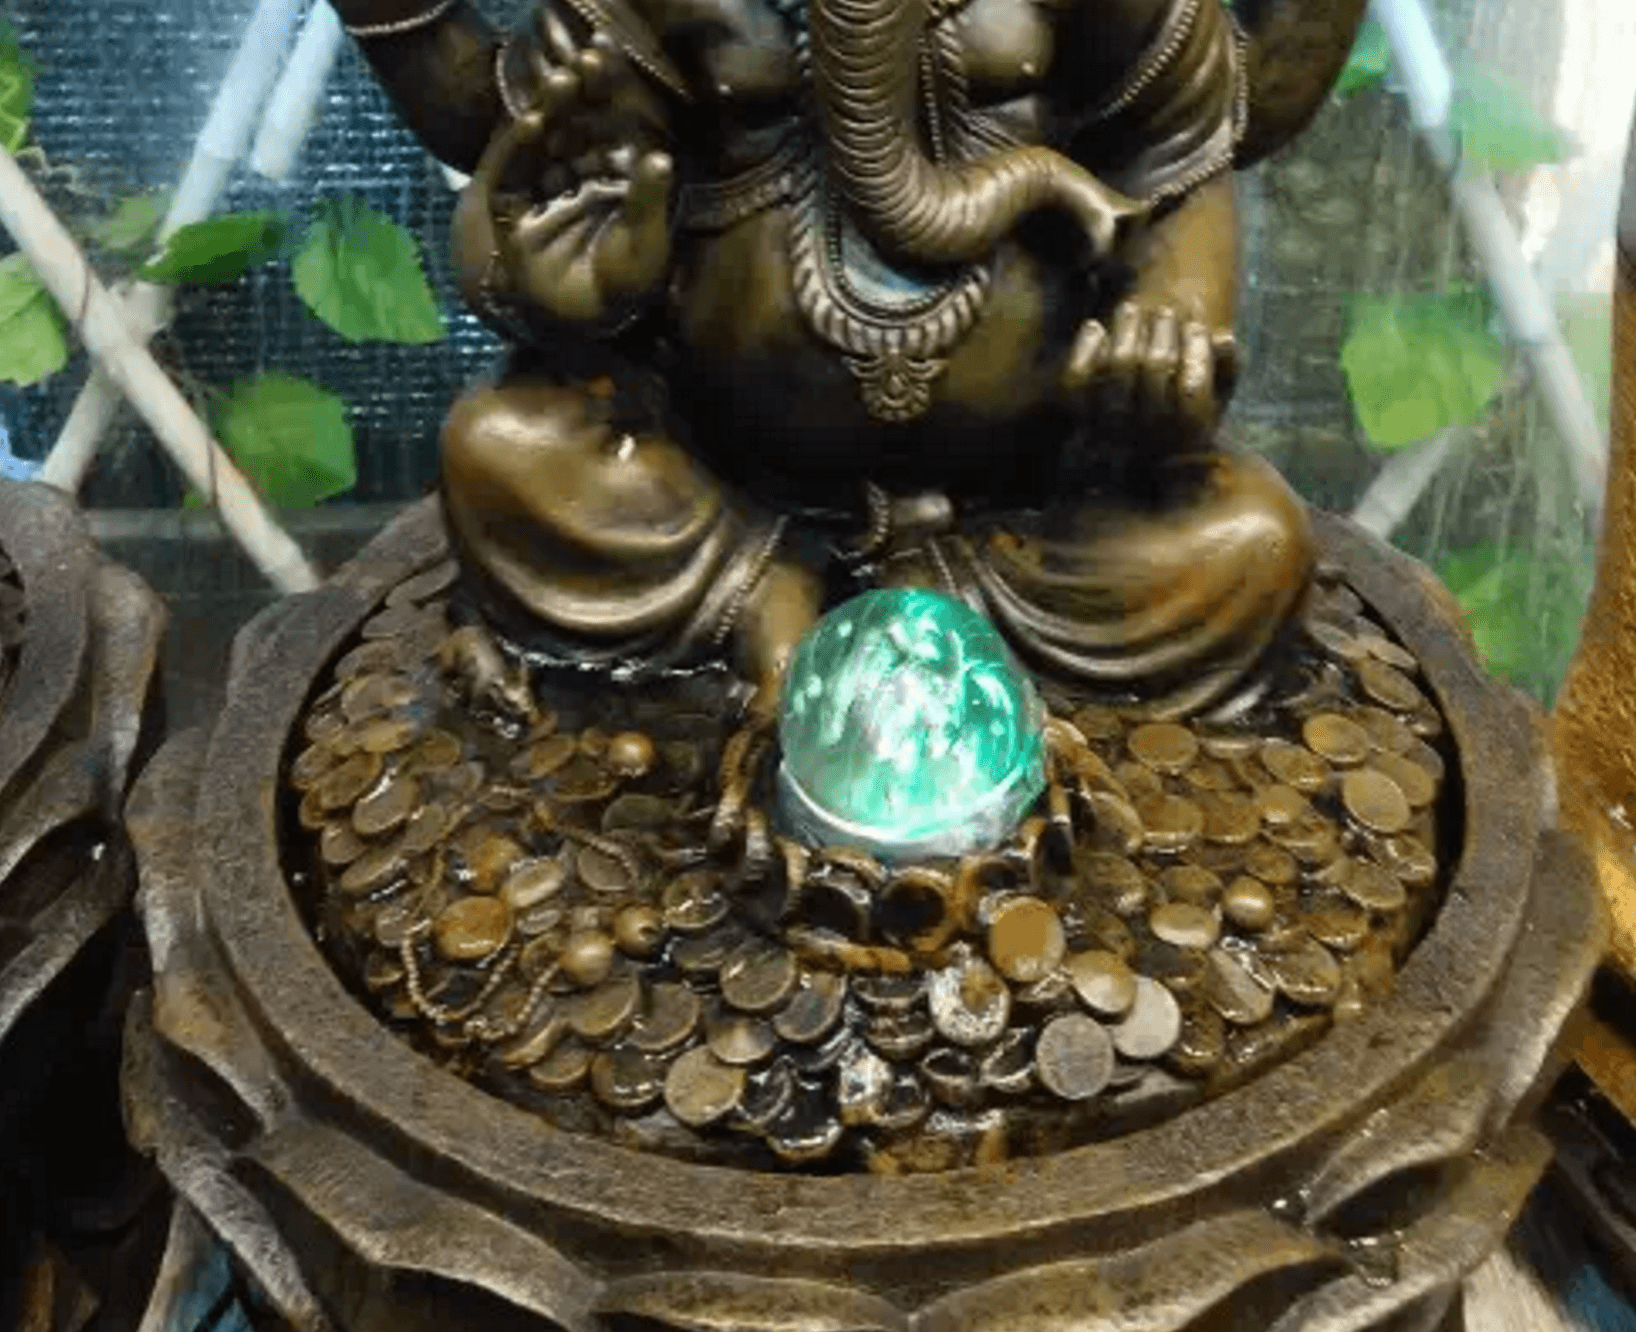 Fengshui Water Fountain - Ganesha Blessings with LED Light & Crystal Ball (Gold & Bronze)